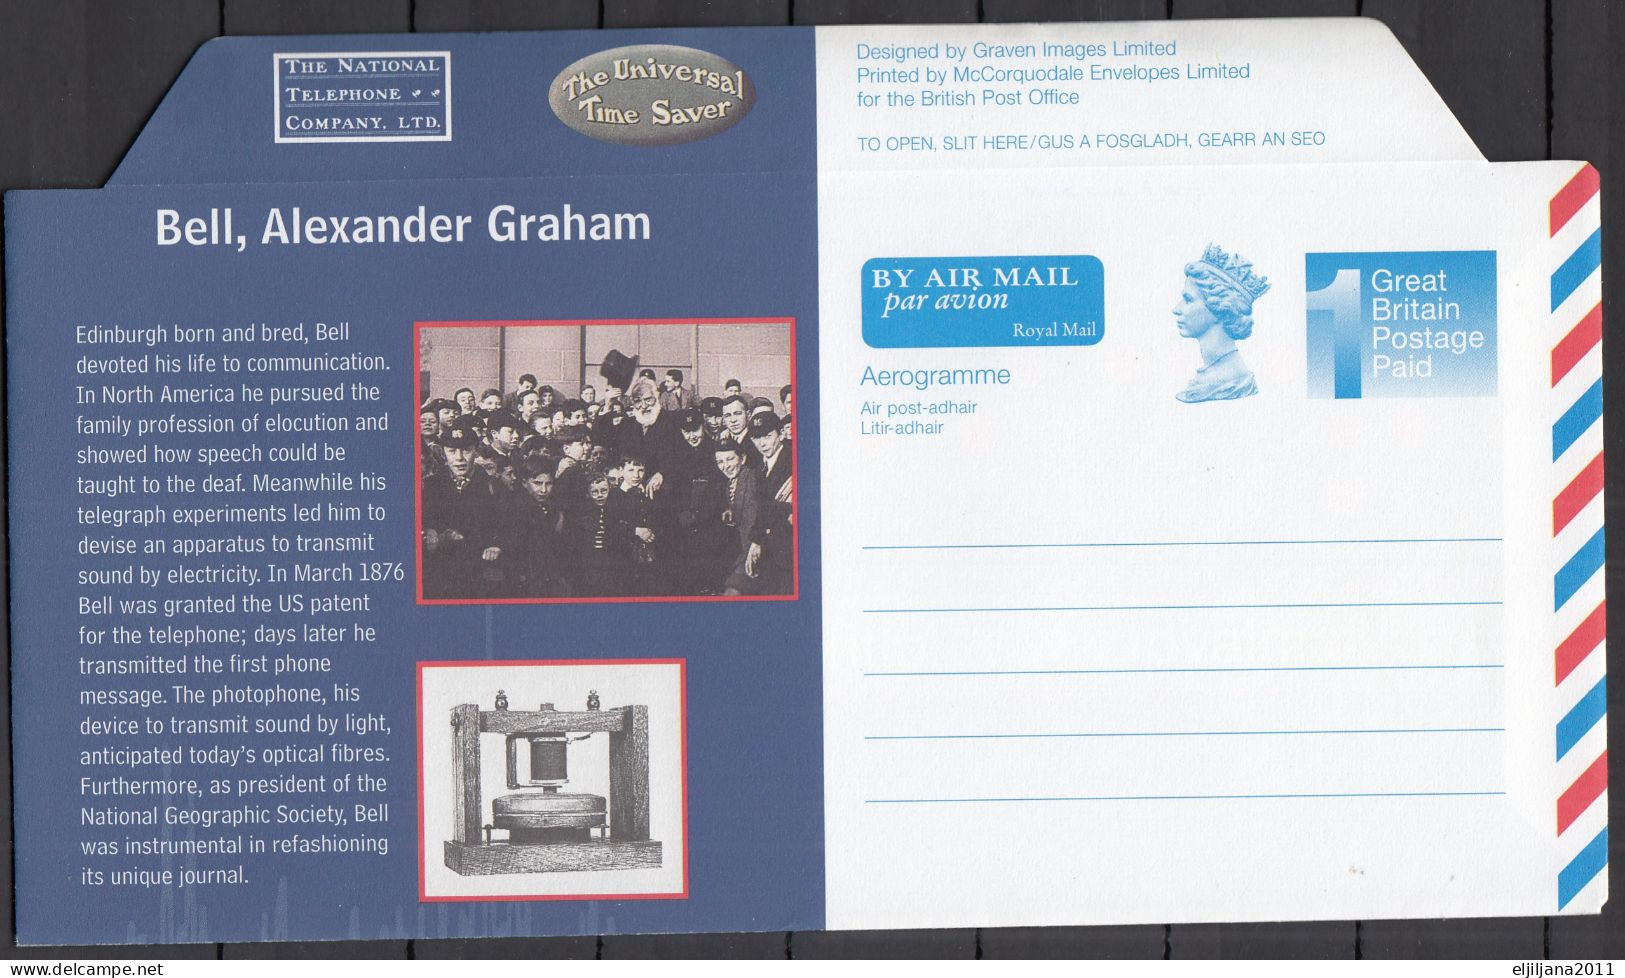 Great Britain - GB / UK, QEII 1997 ⁕ BY AIR MAIL Aerogramme, Royal Mail, Bell, Alexander Graham ⁕ Unused Cover - Luftpost & Aerogramme